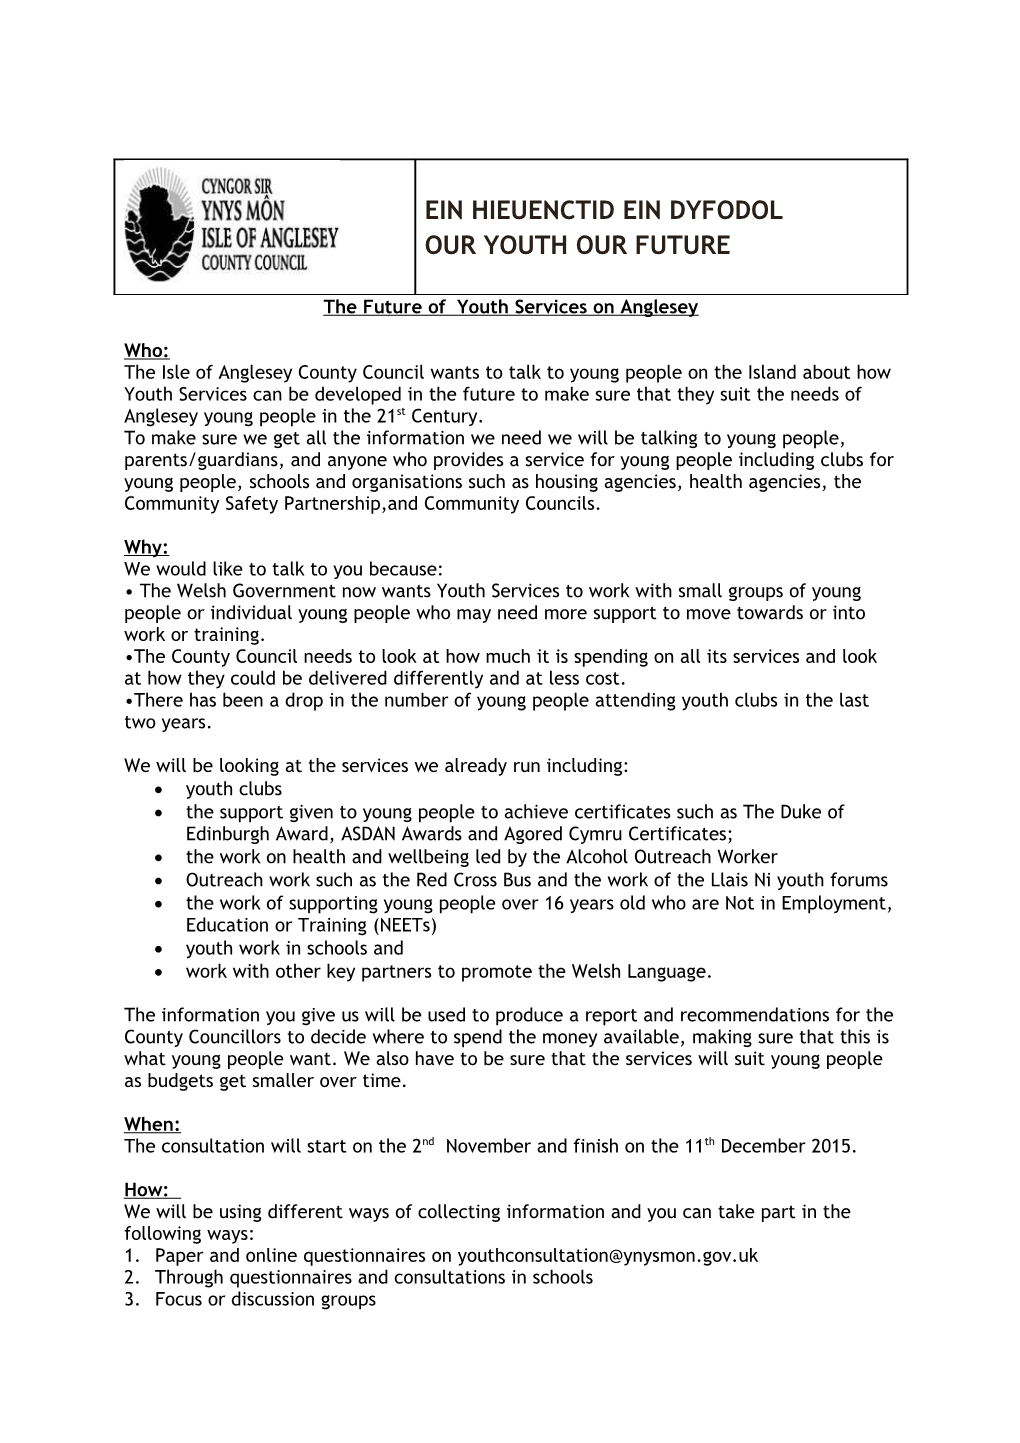 The Future of Youth Services on Anglesey